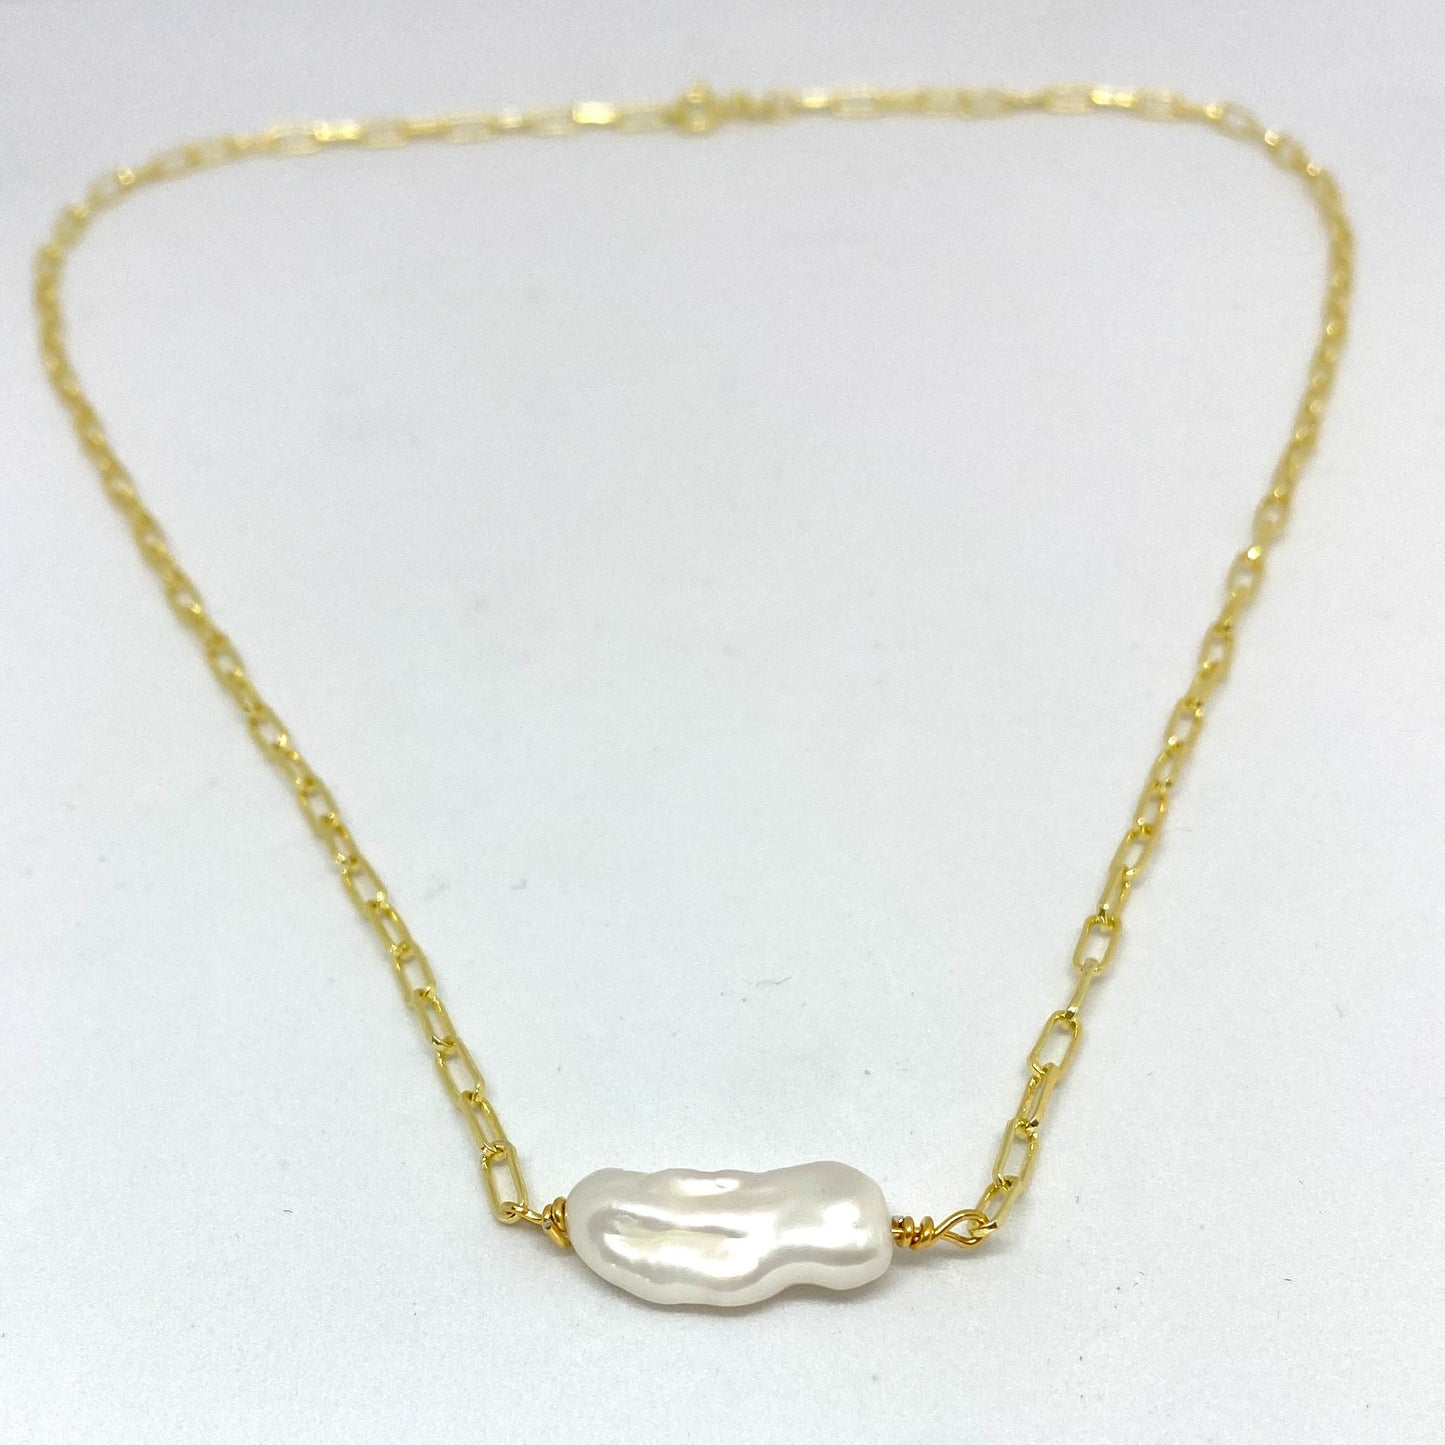 Pearl bar chain necklace